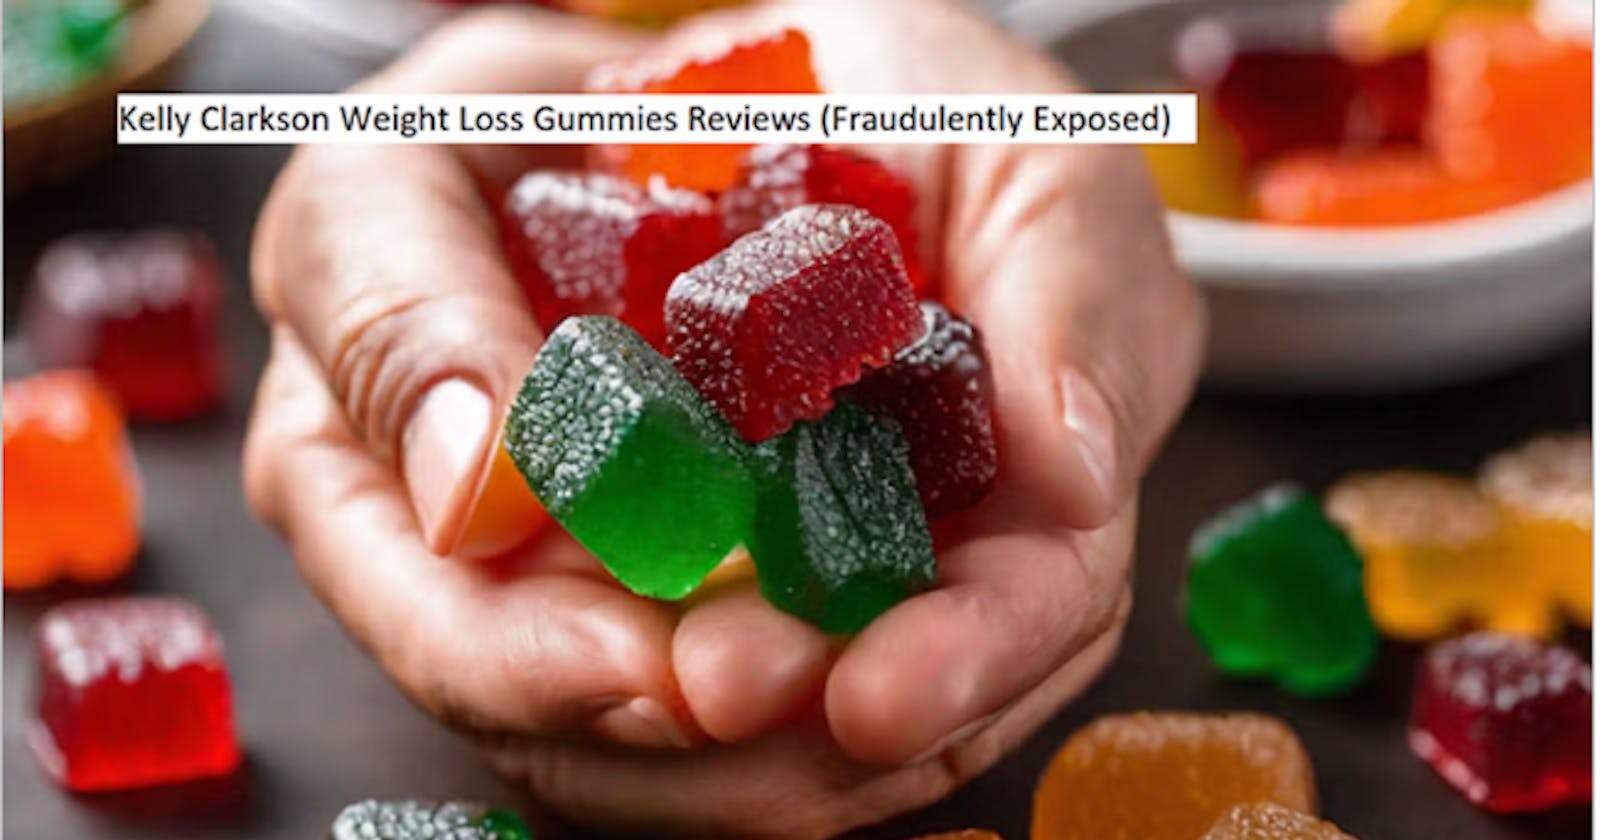 Kelly Clarkson Weight Loss Gummies [Weight Loss] Help With Weight Loss Without Following Any Strict Diet